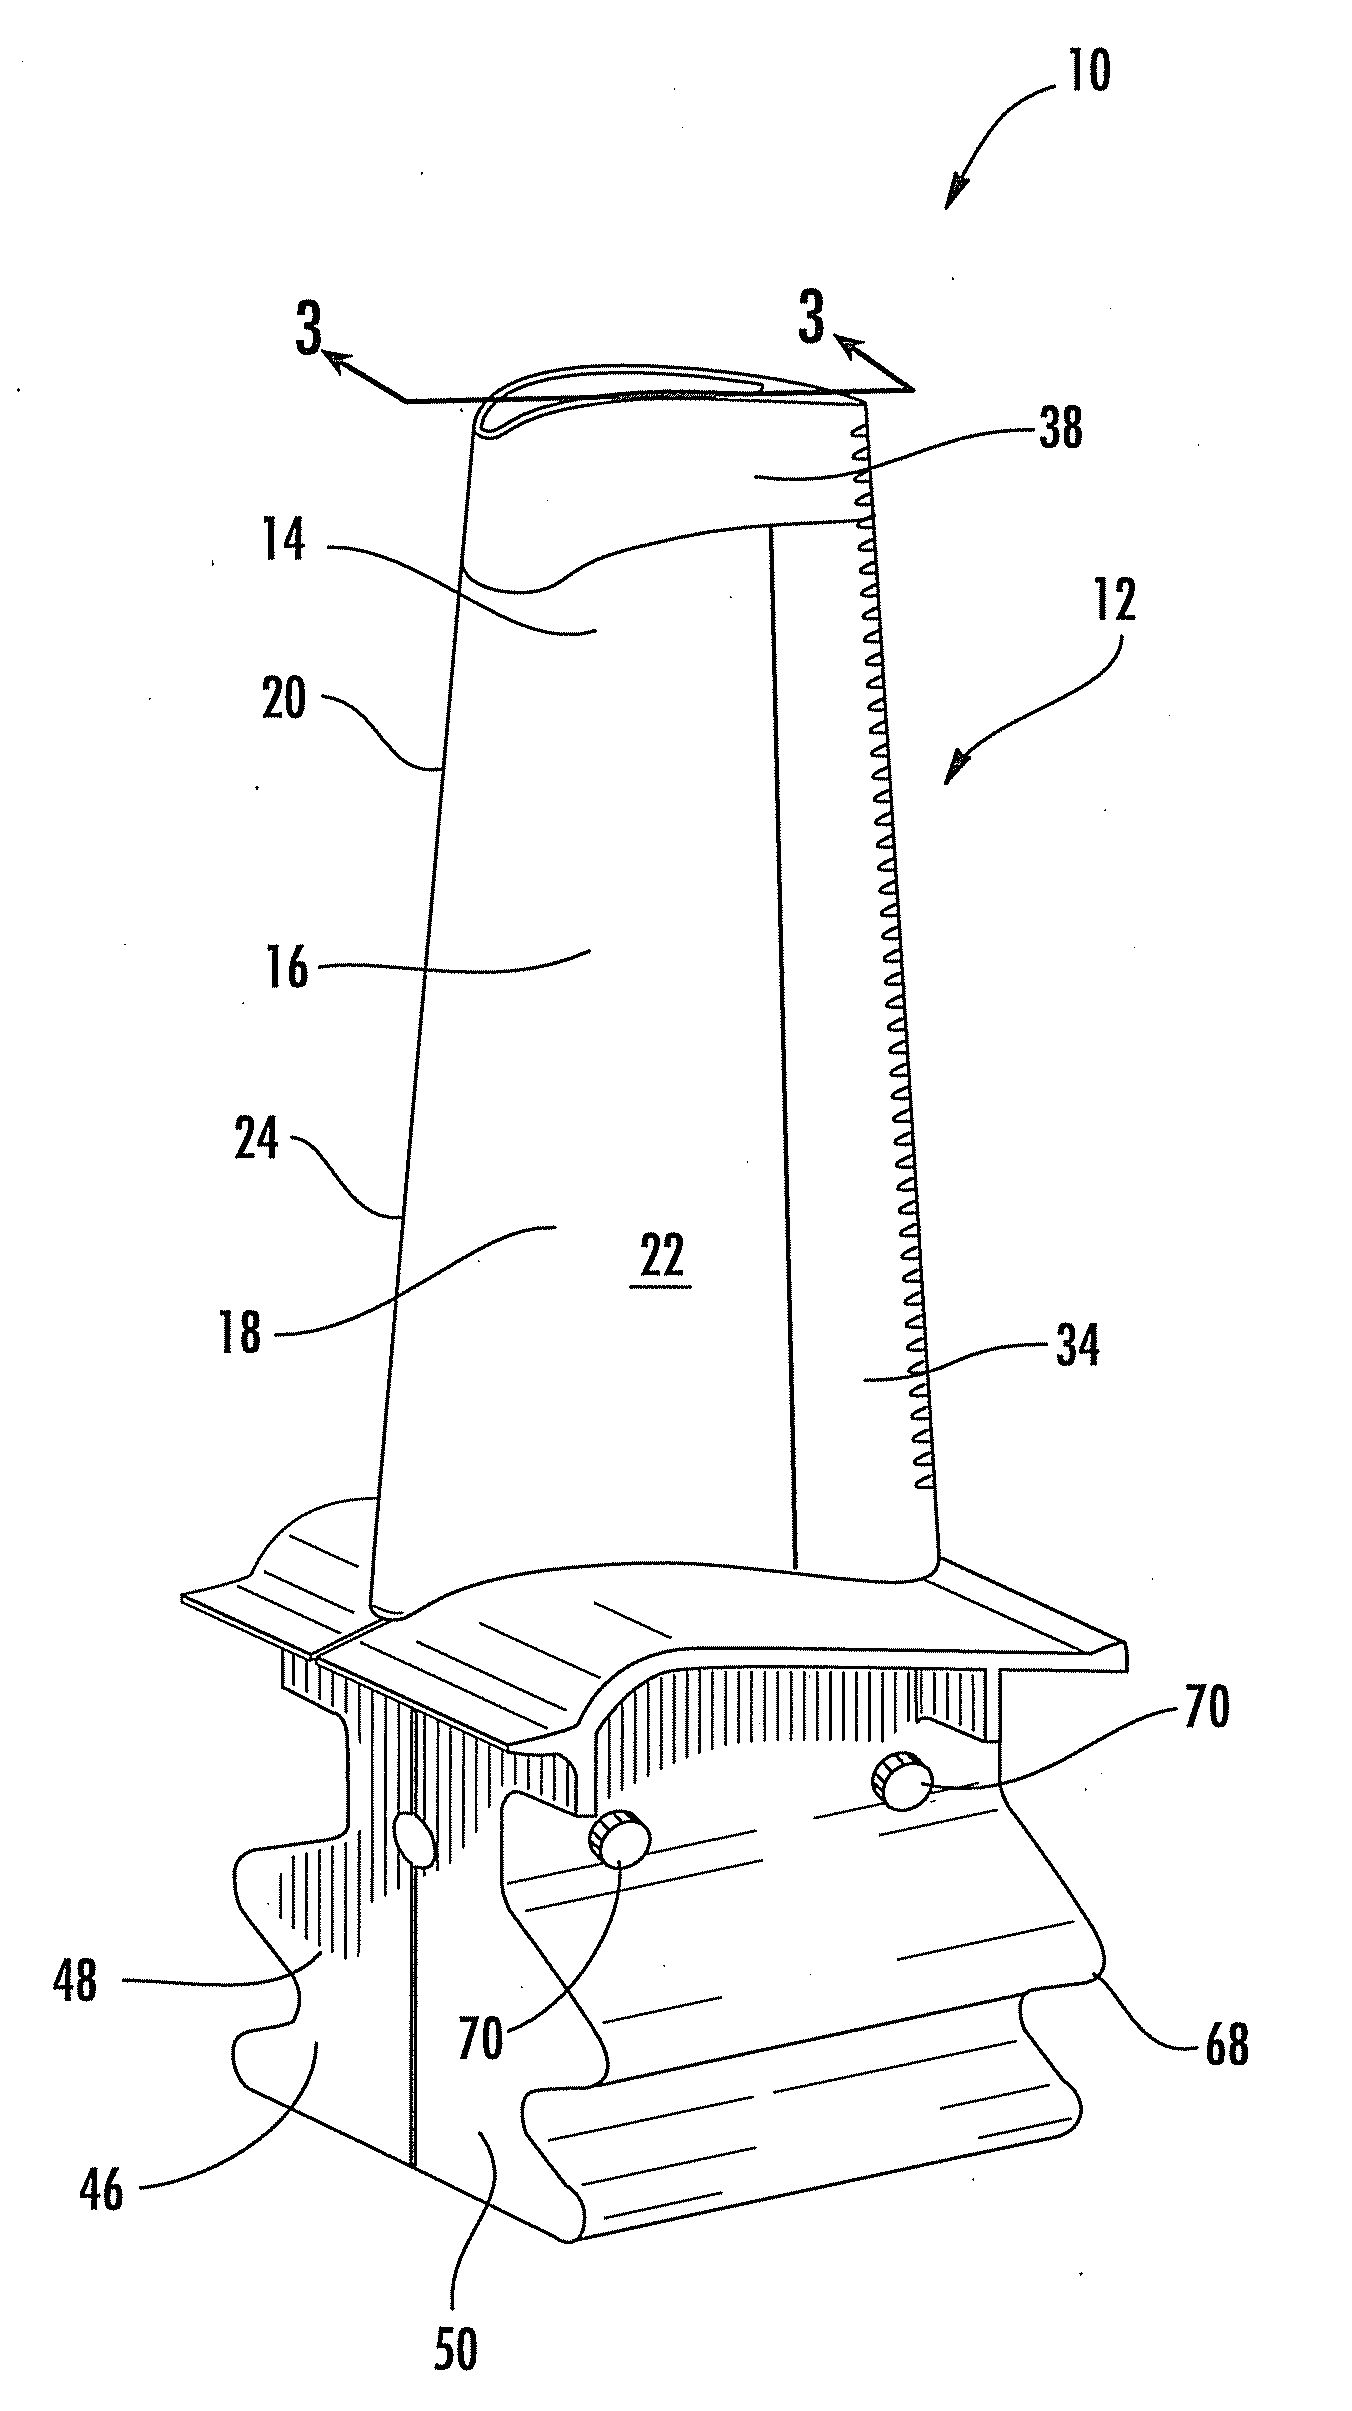 Multiple Piece Turbine Engine Airfoil with a Structural Spar